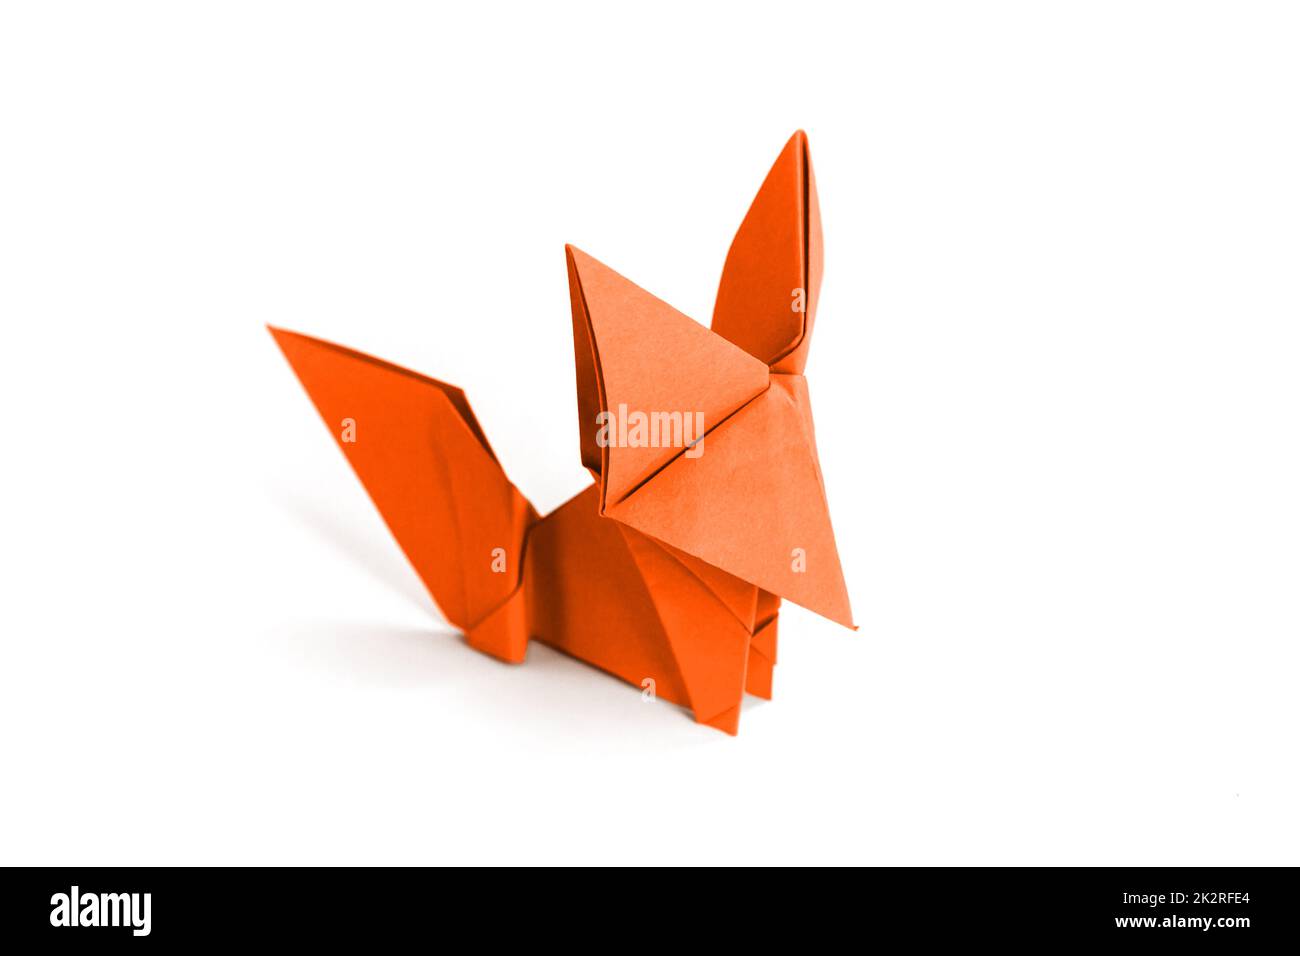 Orange paper fox origami isolated on a white background Stock Photo